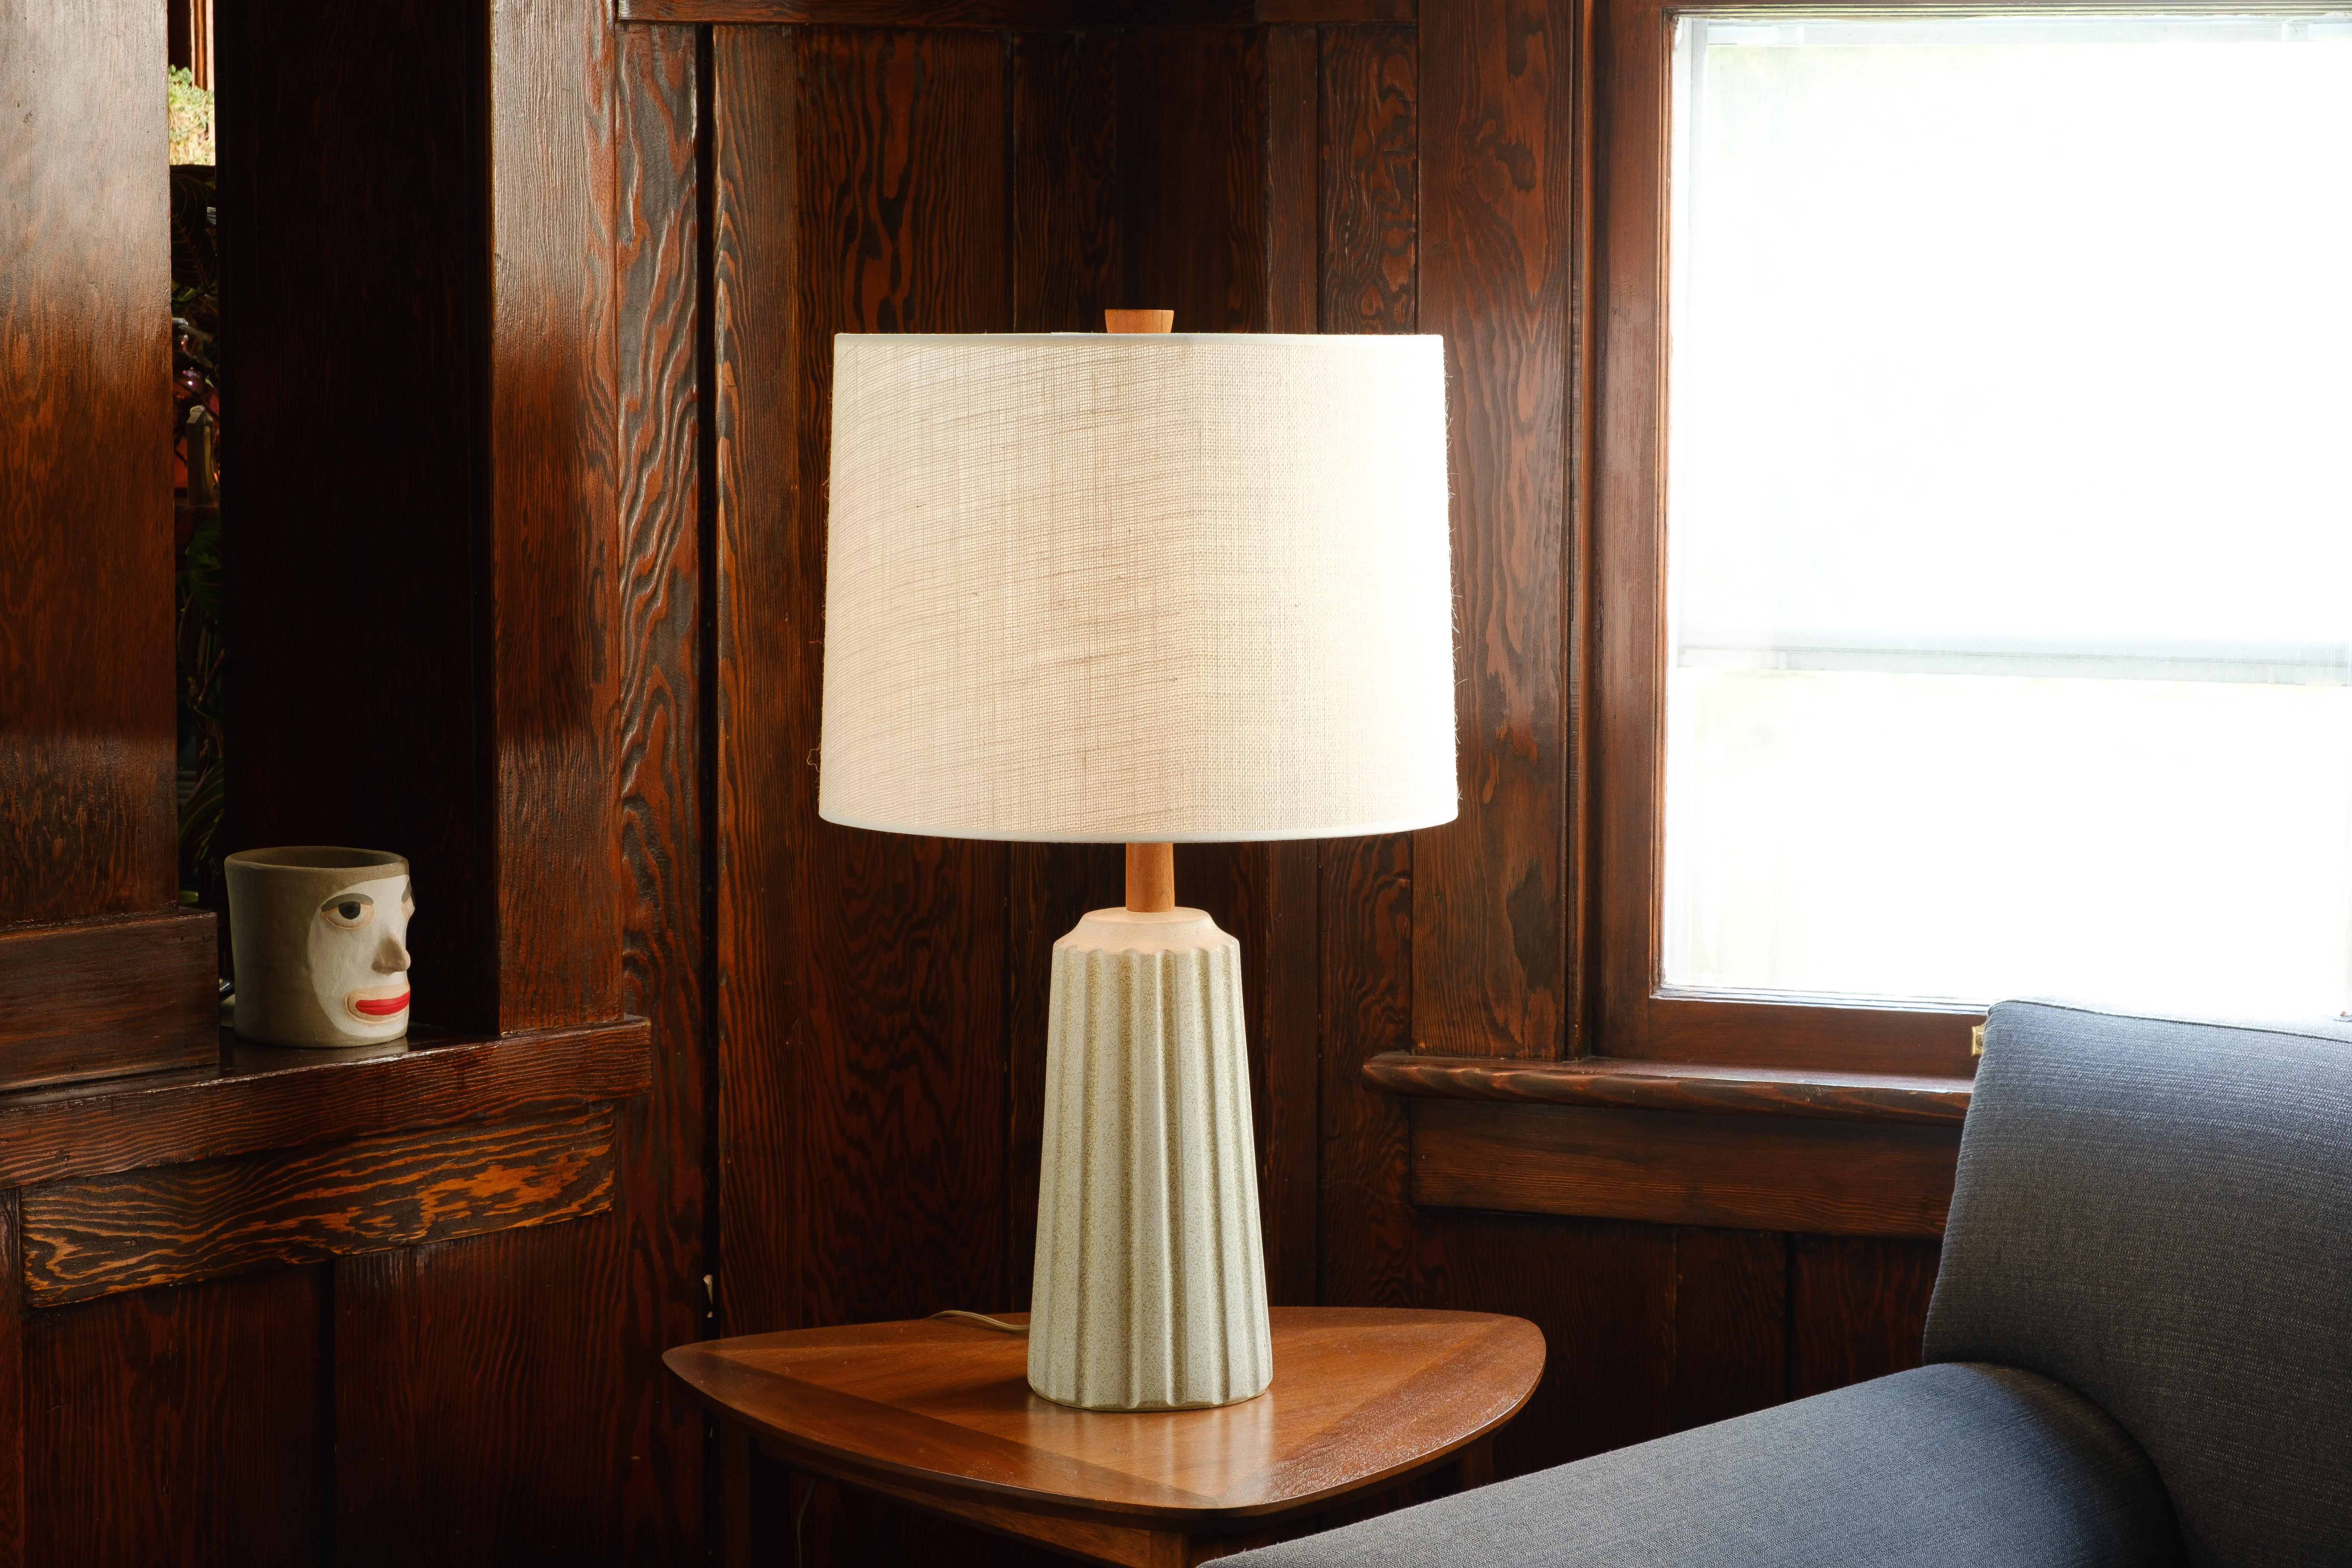 What is it?
—
This unusual Martz lamp comes in a matte cream glaze with embedded bits of sand. Reminiscent of a column, indentations surround the perimeter. The ceramic body gives way to a walnut neck and the whole ensemble is capped off with an